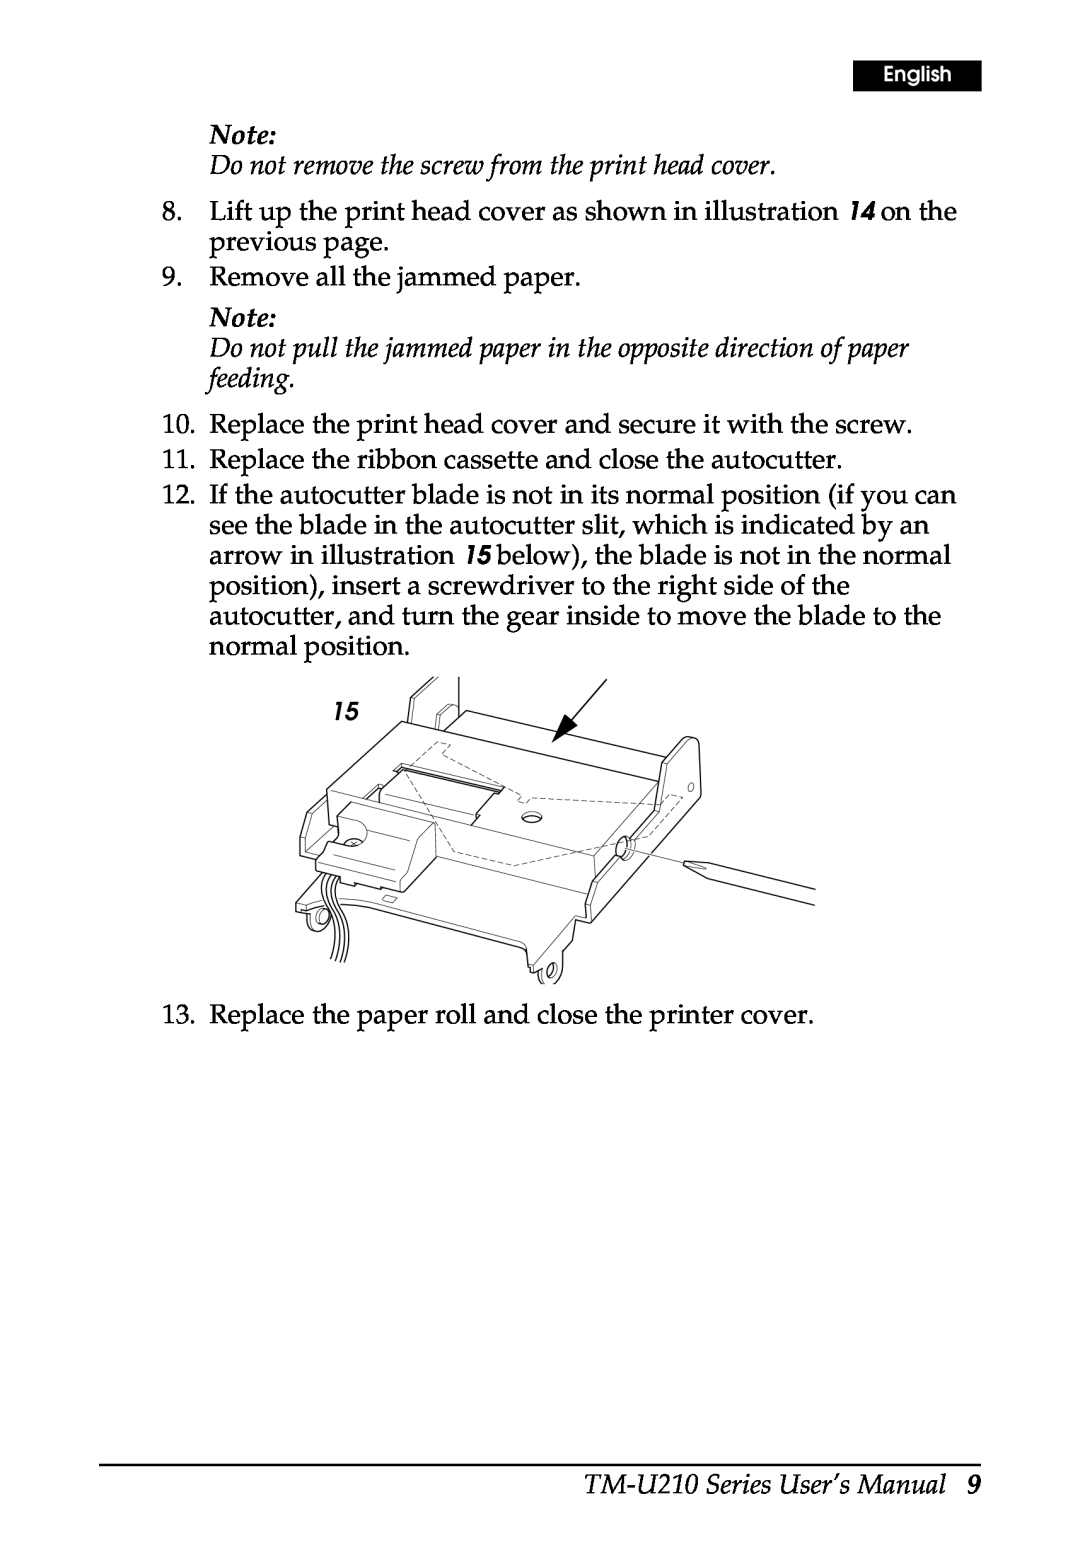 Epson M119D Do not remove the screw from the print head cover, Remove all the jammed paper, TM-U210 Series User’s Manual 